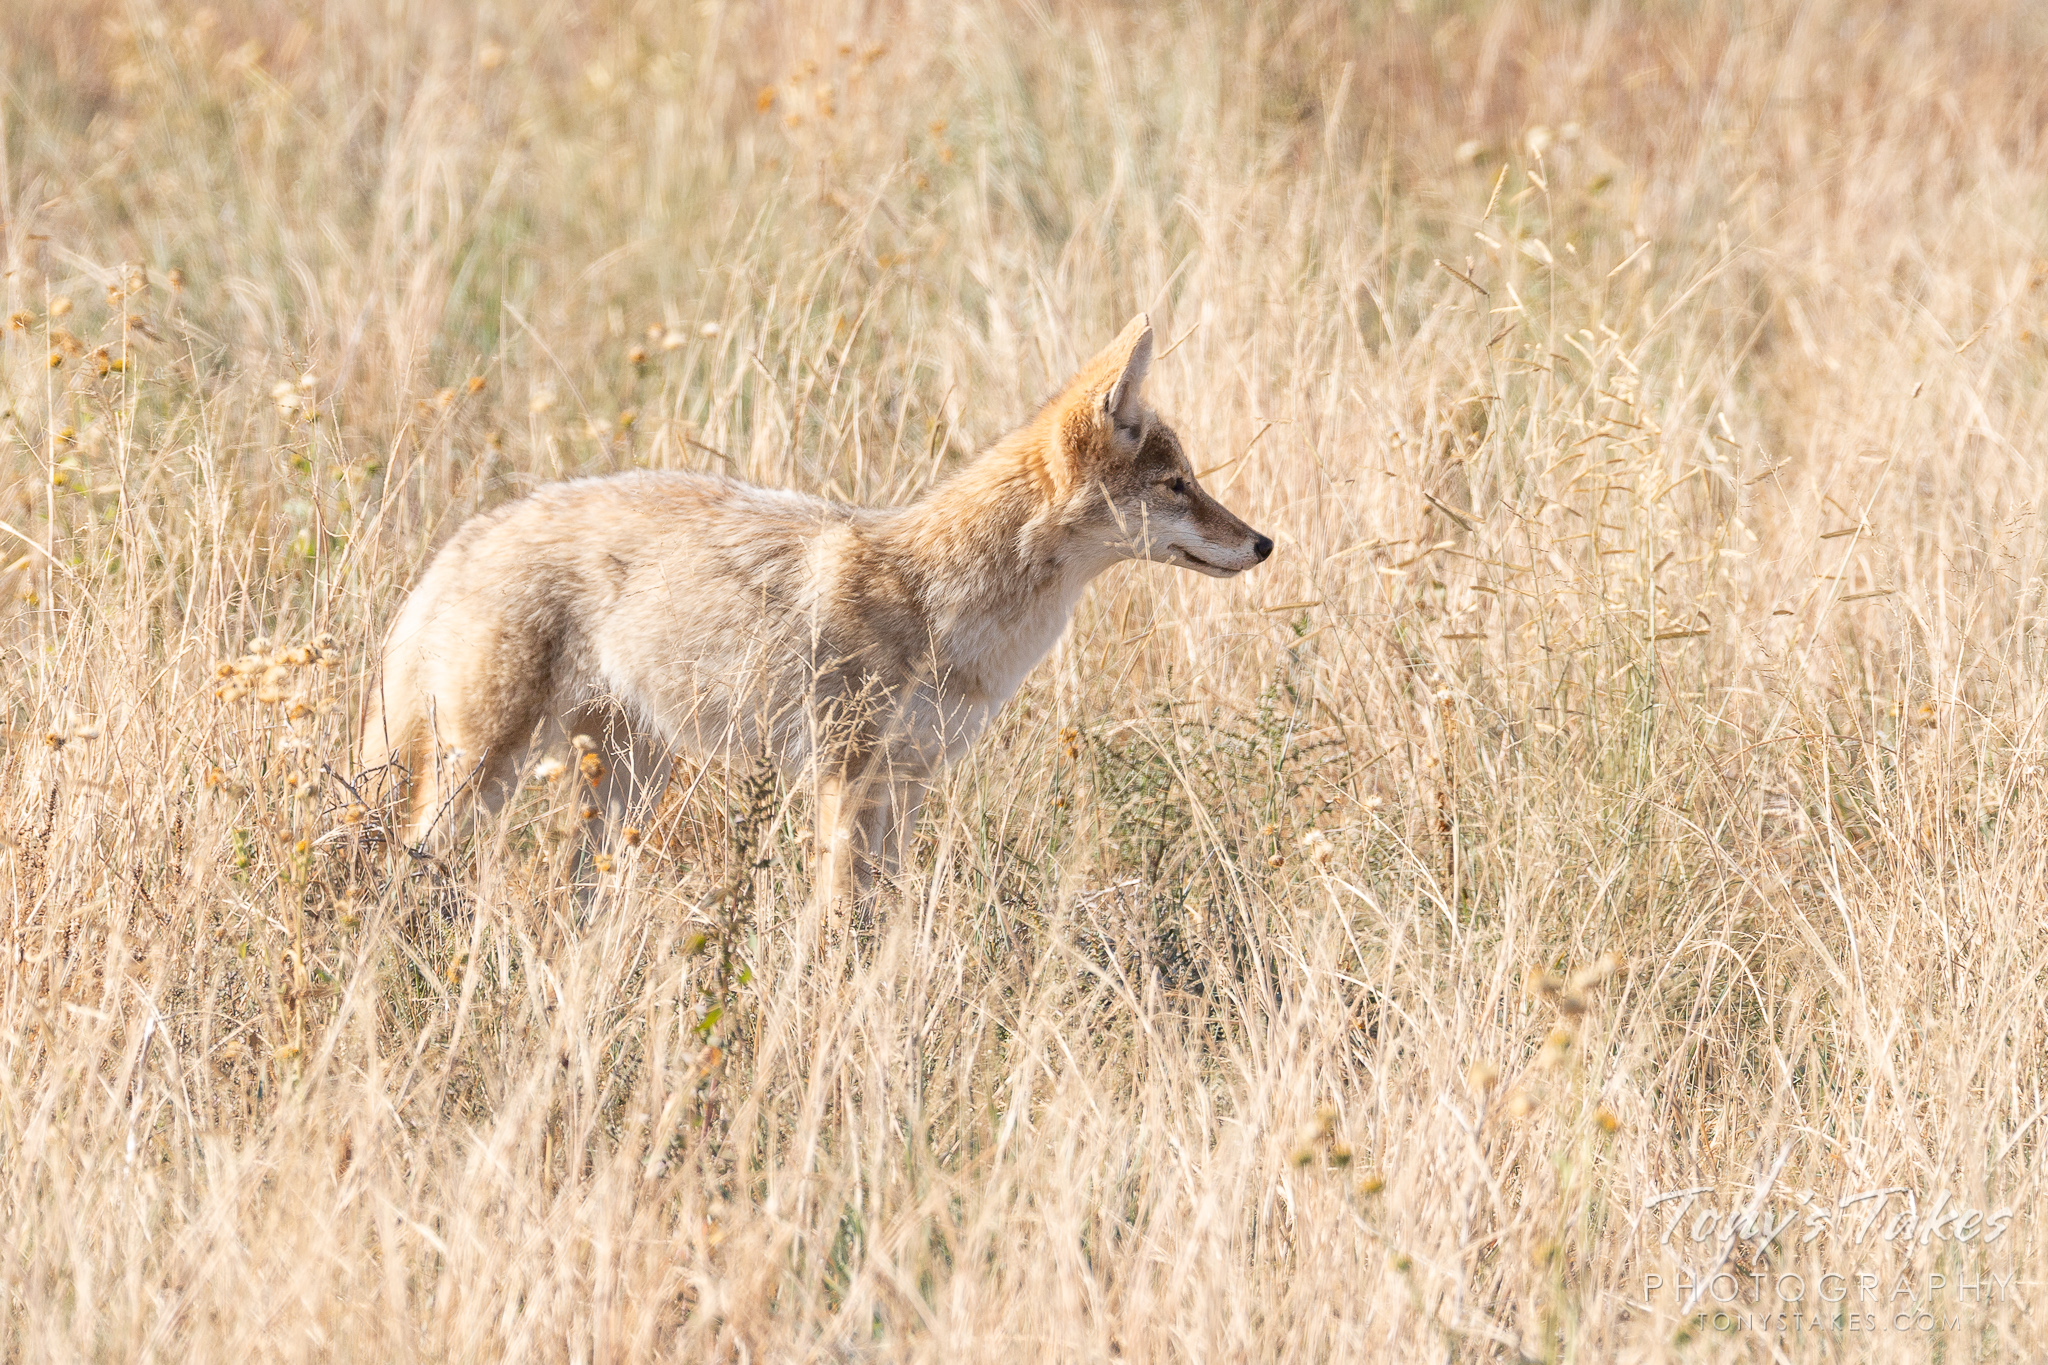 A Coyote keeps an eye out for a possible meal on the plains of Colorado. (© Tony’s Takes)